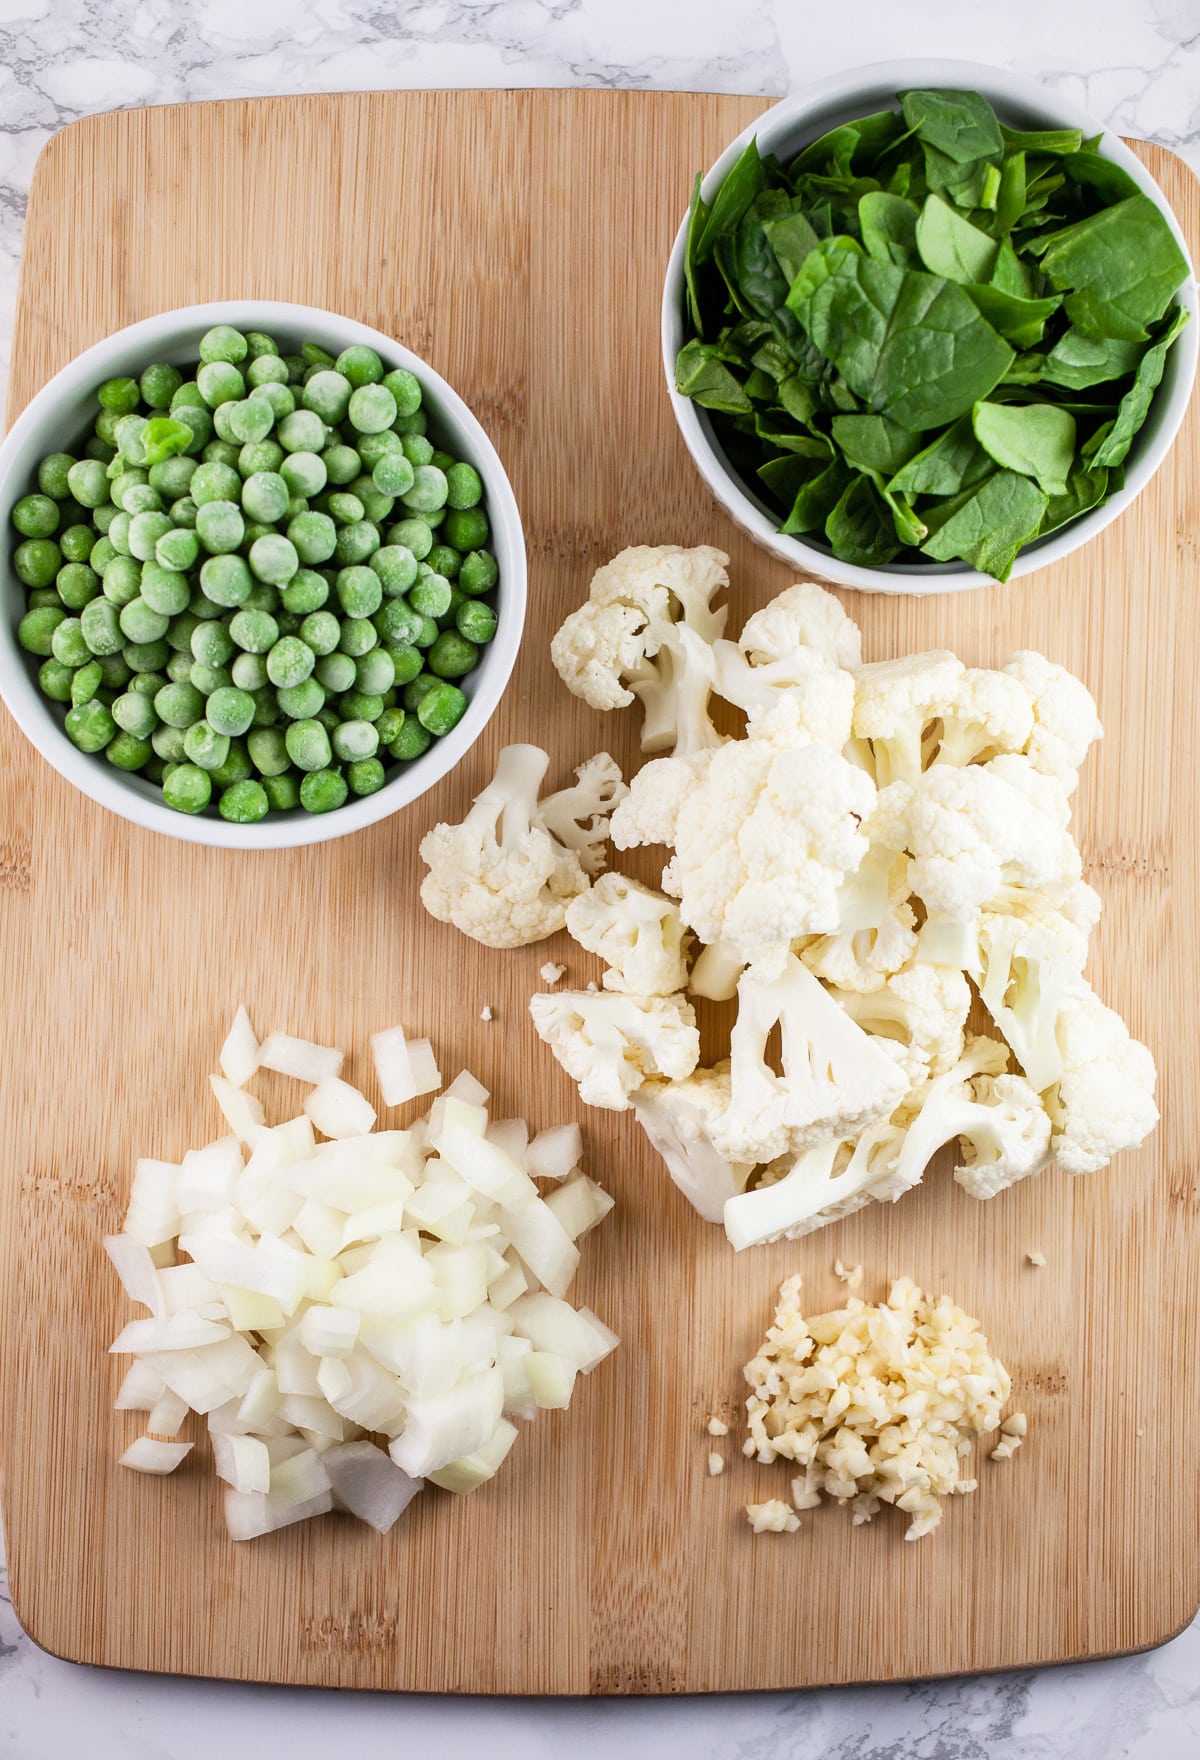 Minced garlic, onions, cauliflower florets, frozen peas, and chopped spinach on wooden cutting board.